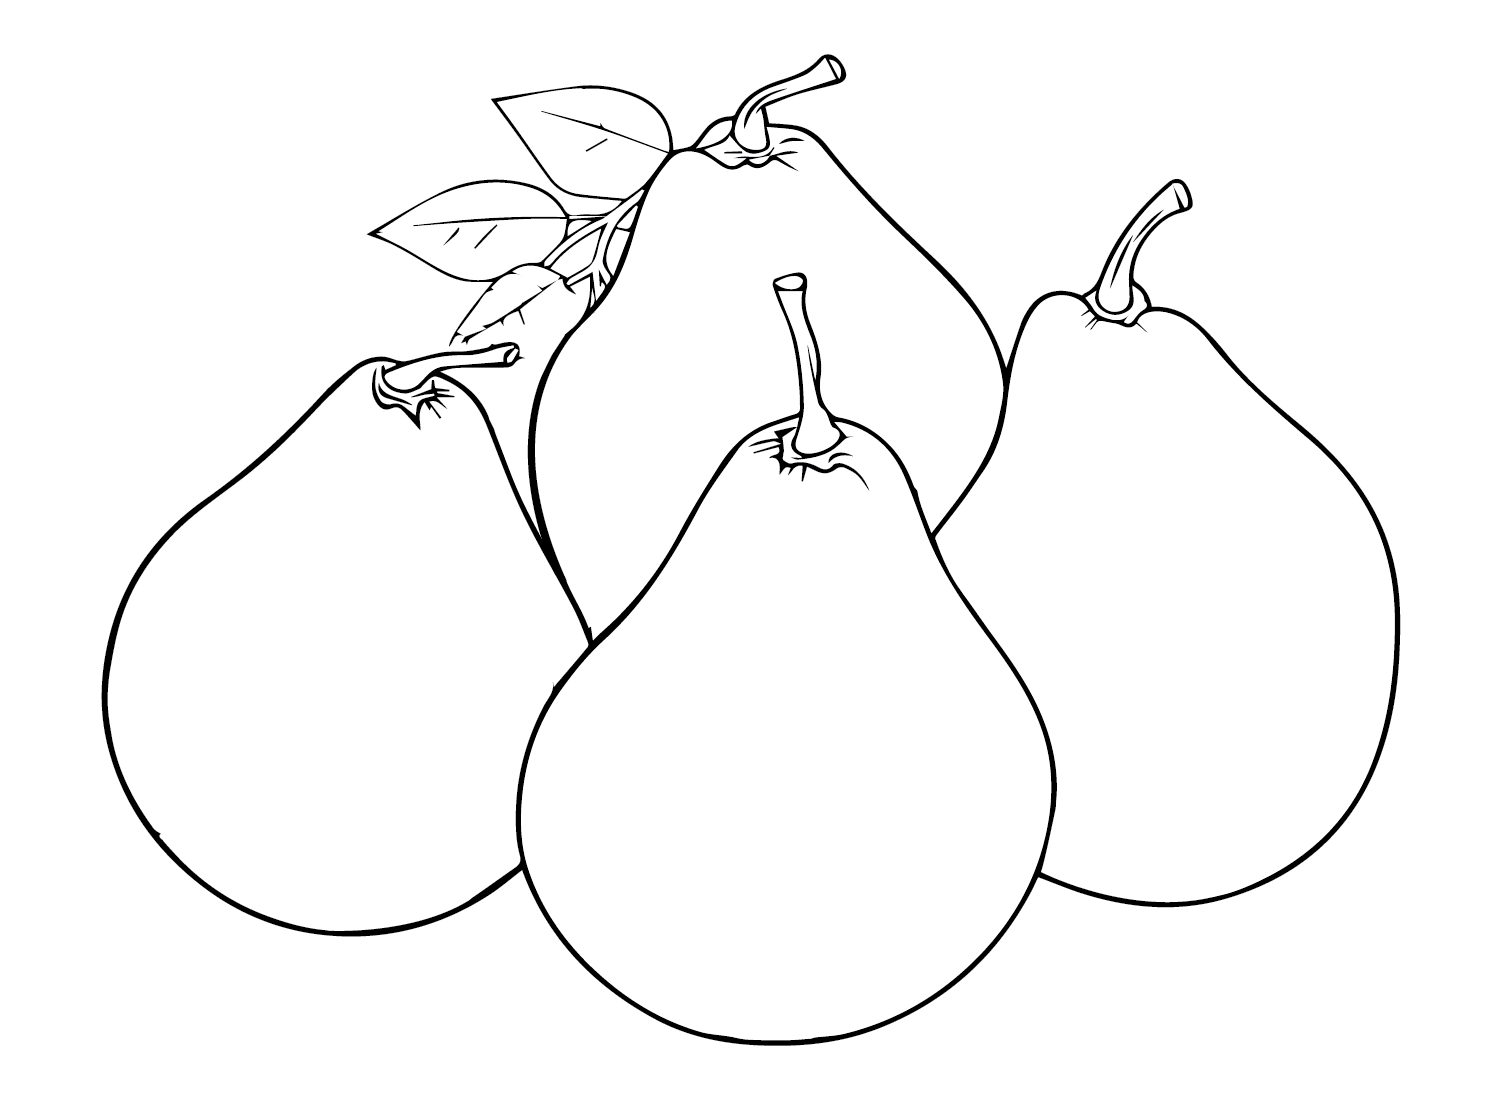 Pomelo to Print Coloring Page